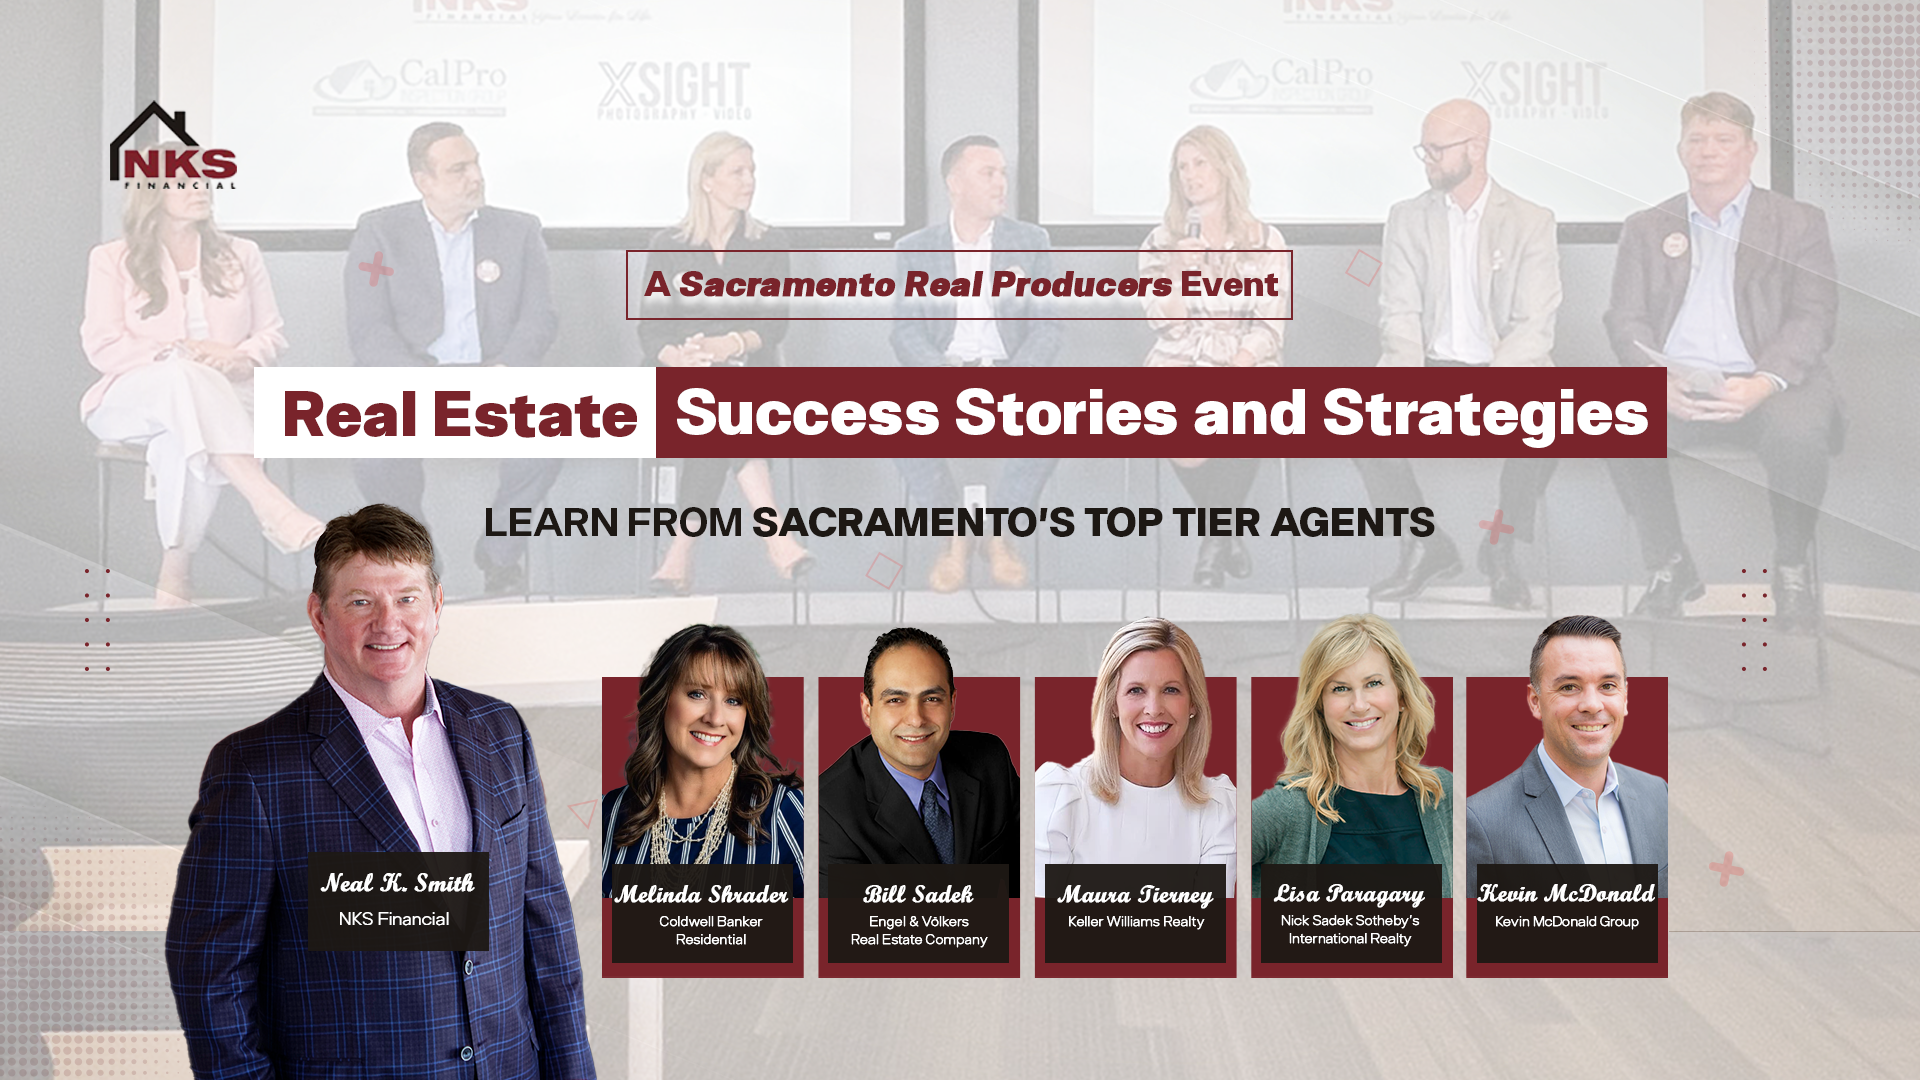 Real Estate Success Stories and Strategies